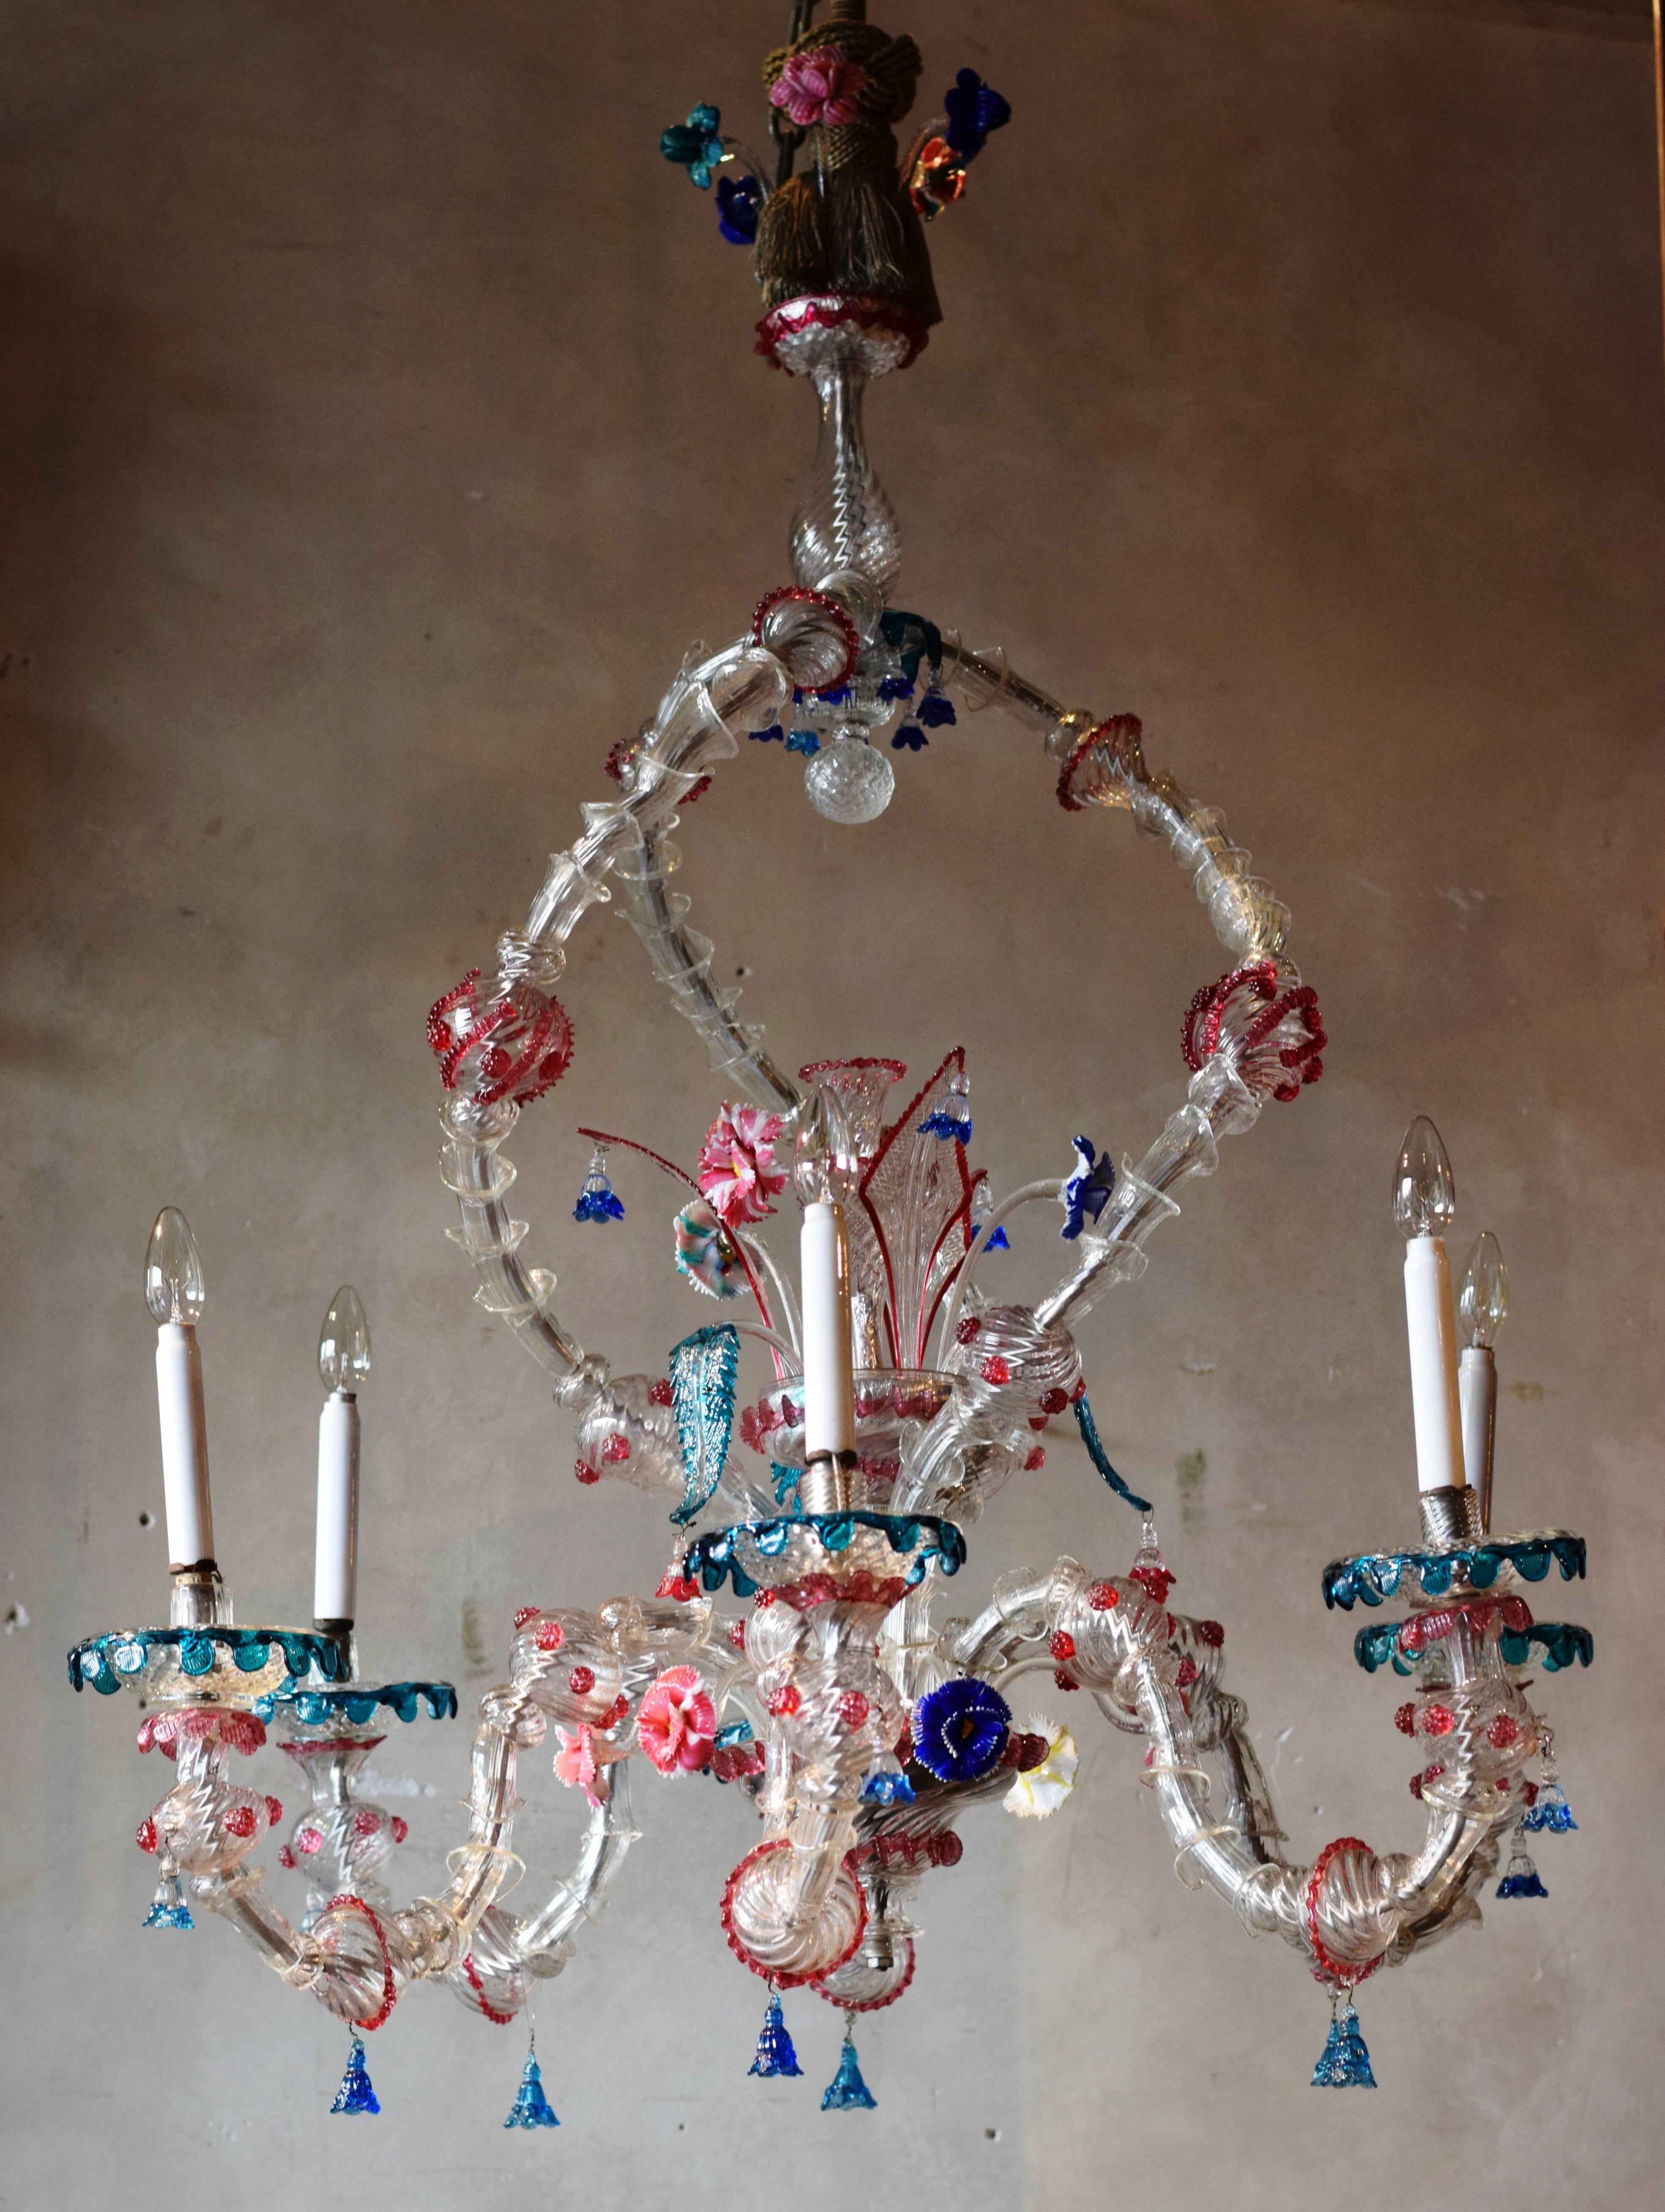 This beautiful, colorful, detailed and very large Ca'rezzonico chandelier was made in Murano, near Venice.

The chandelier is compiled from handblown parts. The amount of detail is astonishing: flowers, leafs, florals and scallops. 

The